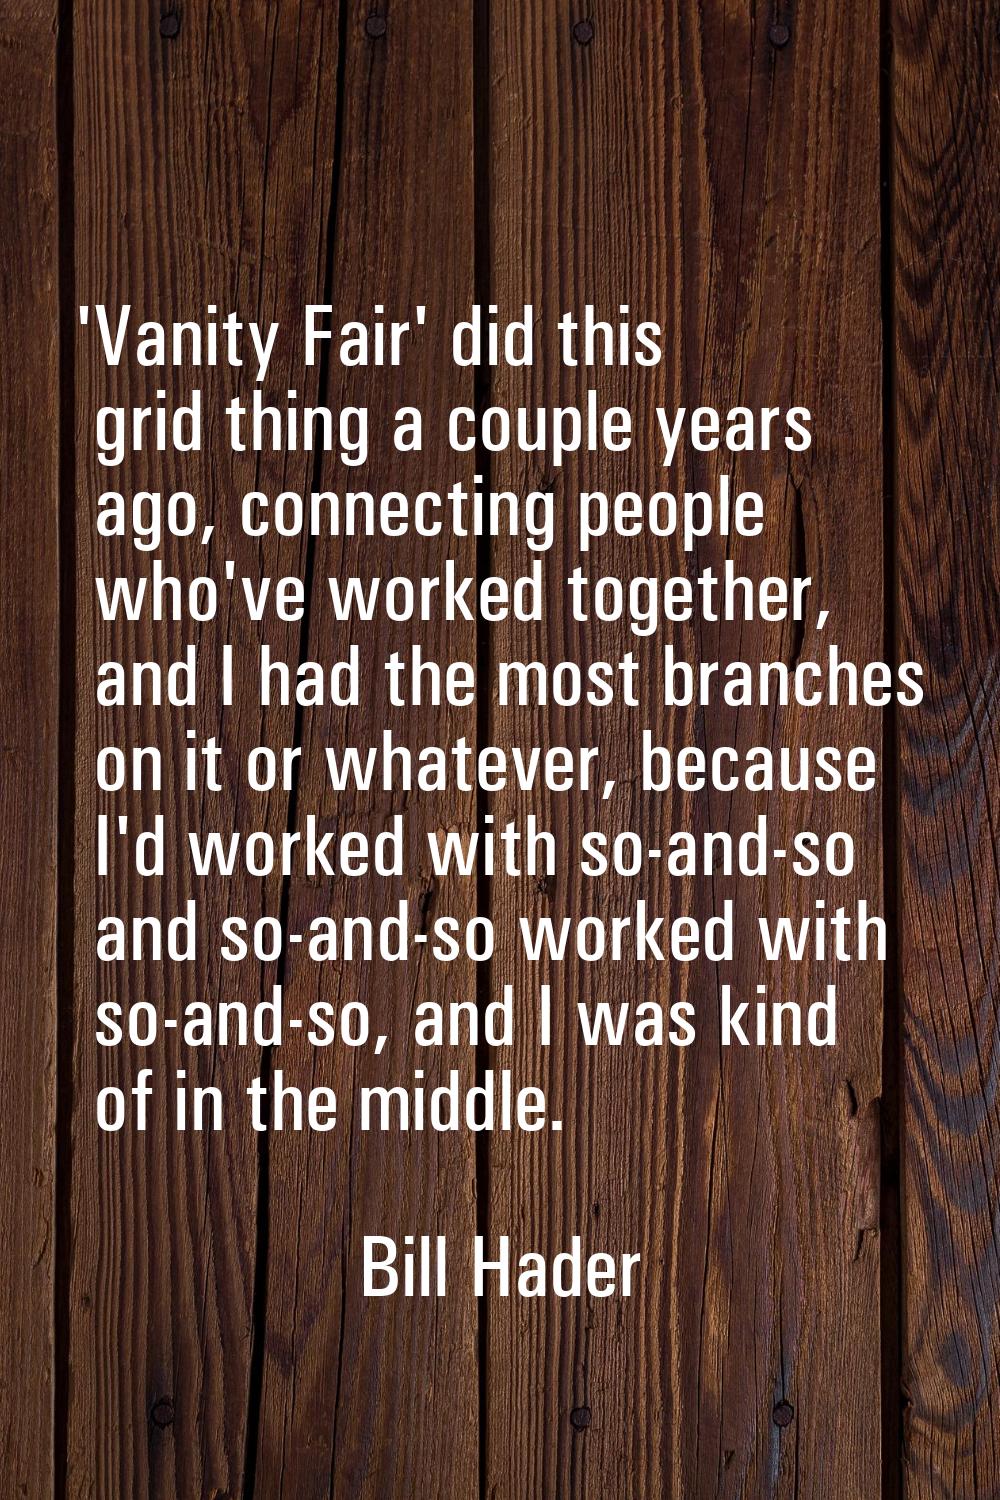 'Vanity Fair' did this grid thing a couple years ago, connecting people who've worked together, and